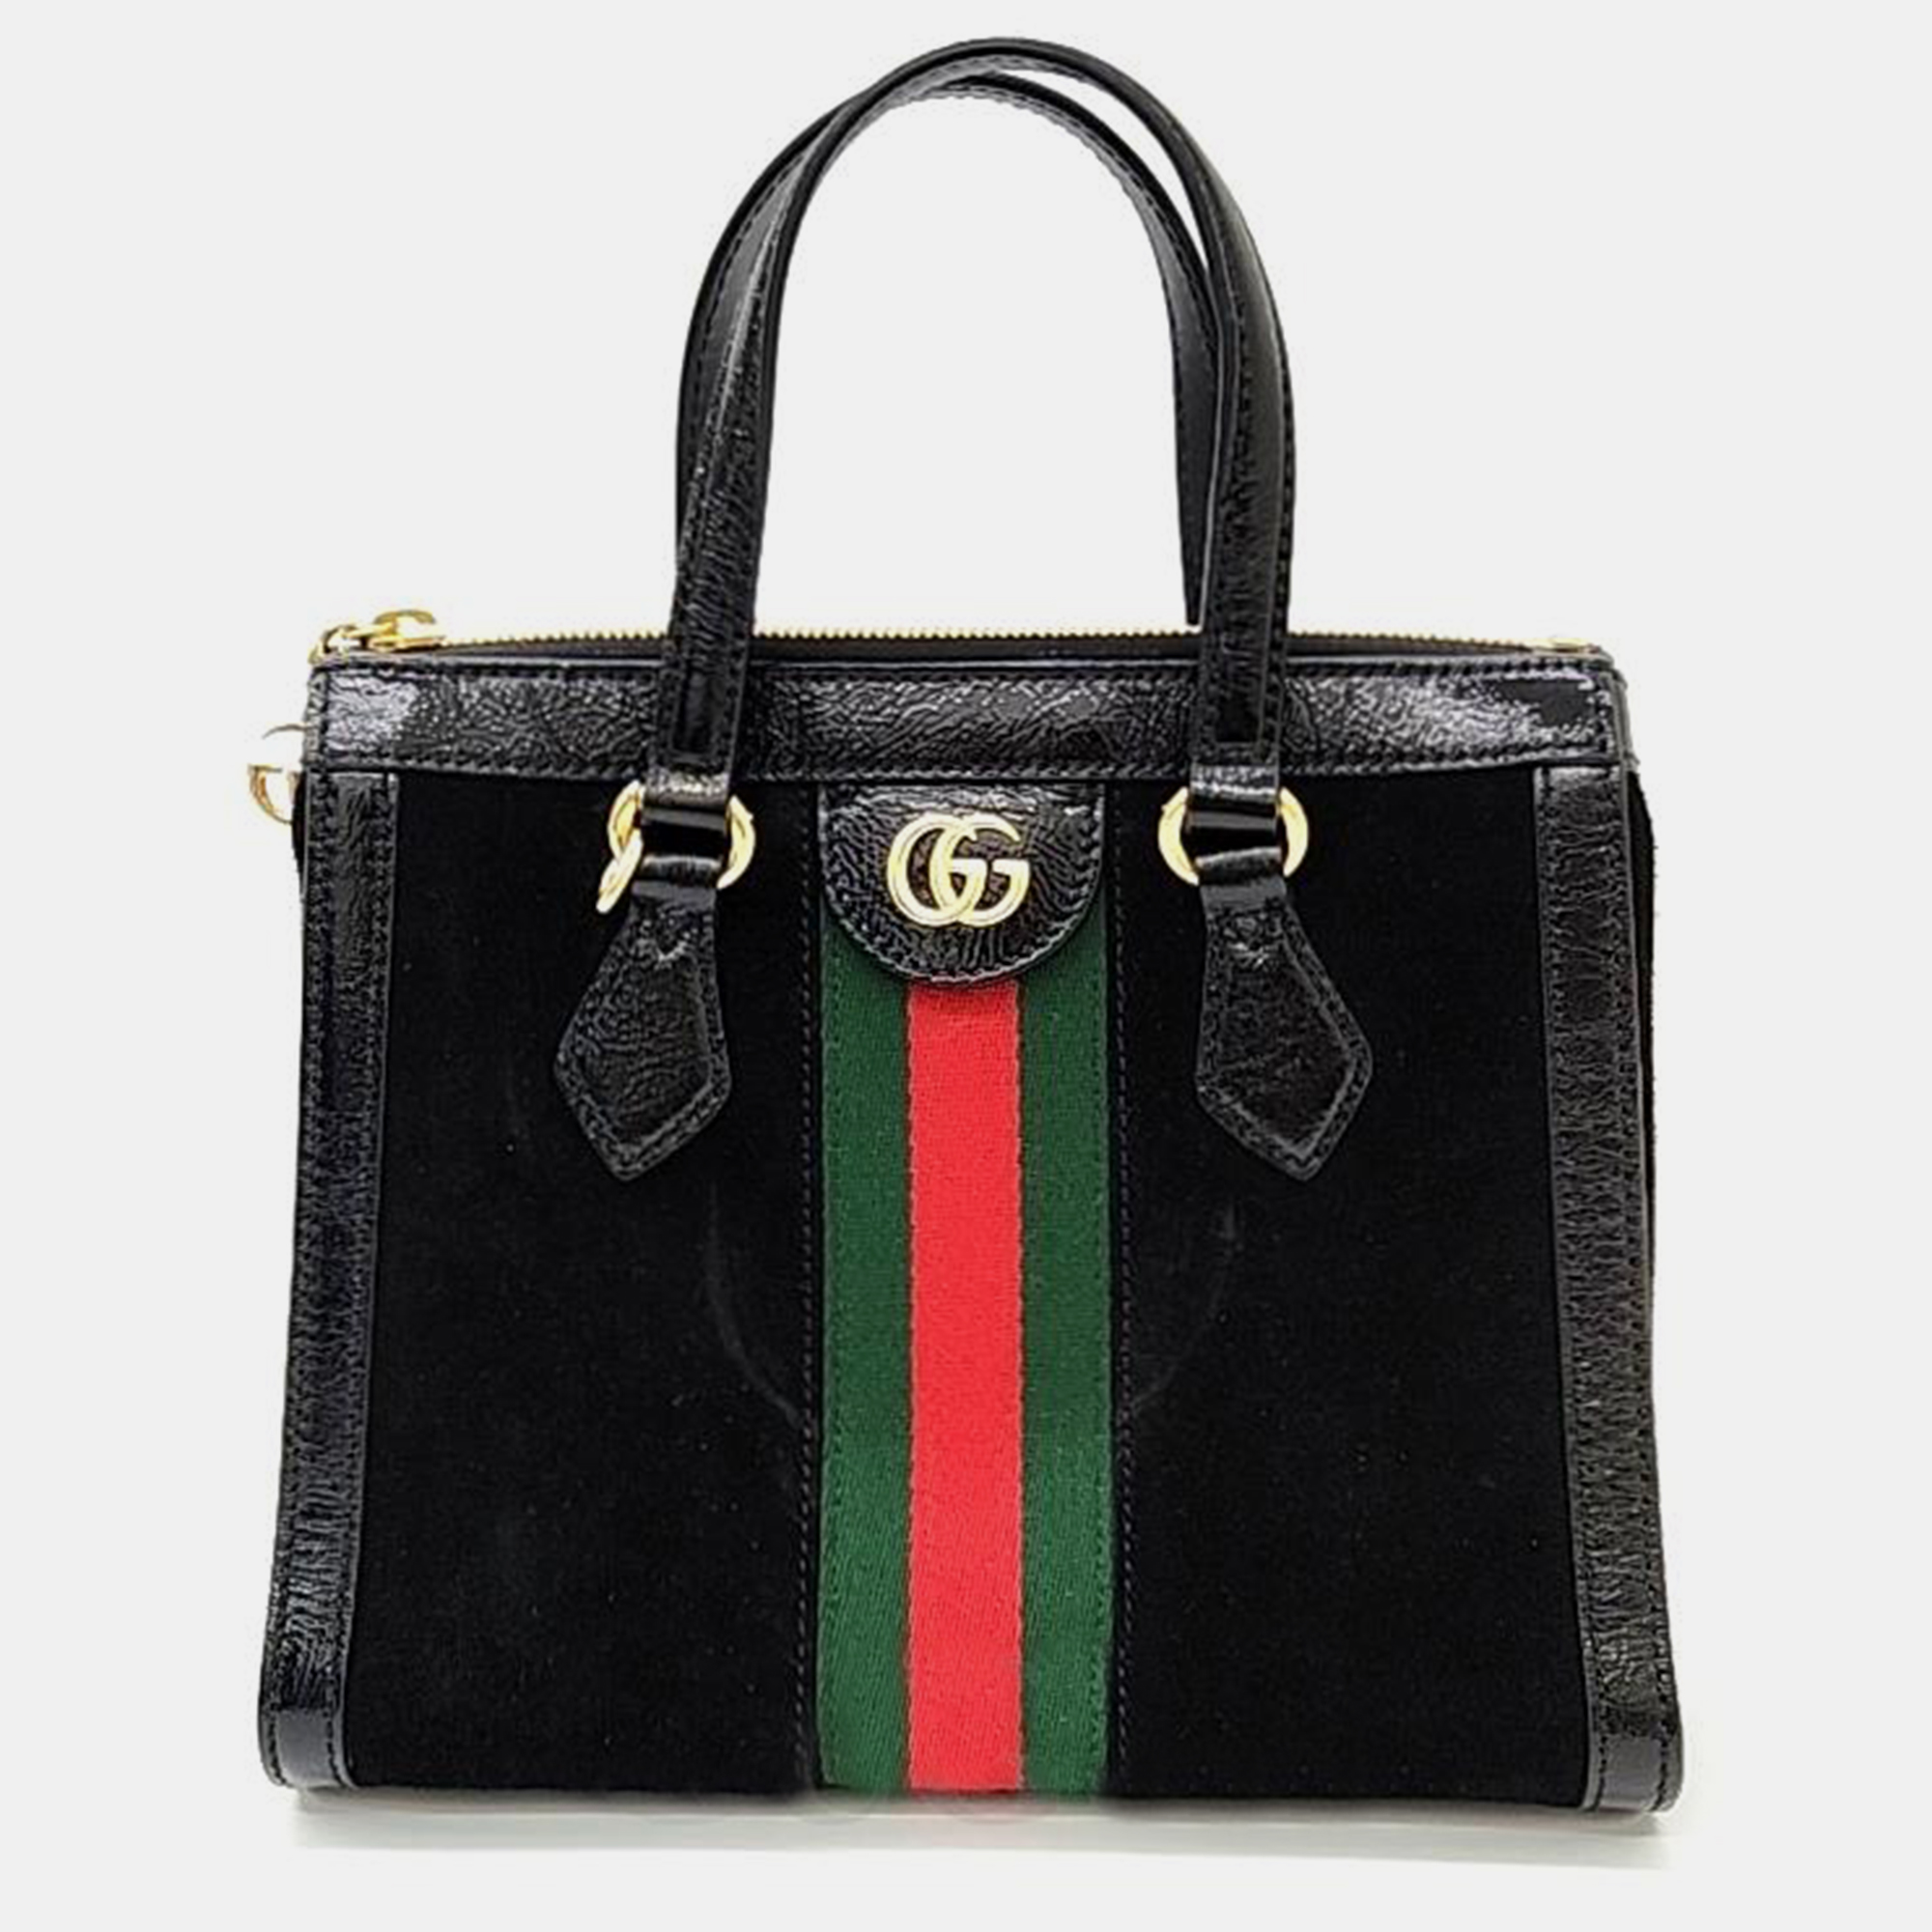 Crafted with precision this Gucci shoulder bag combines luxurious materials with impeccable design ensuring you make a sophisticated statement wherever you go. Invest in it today.